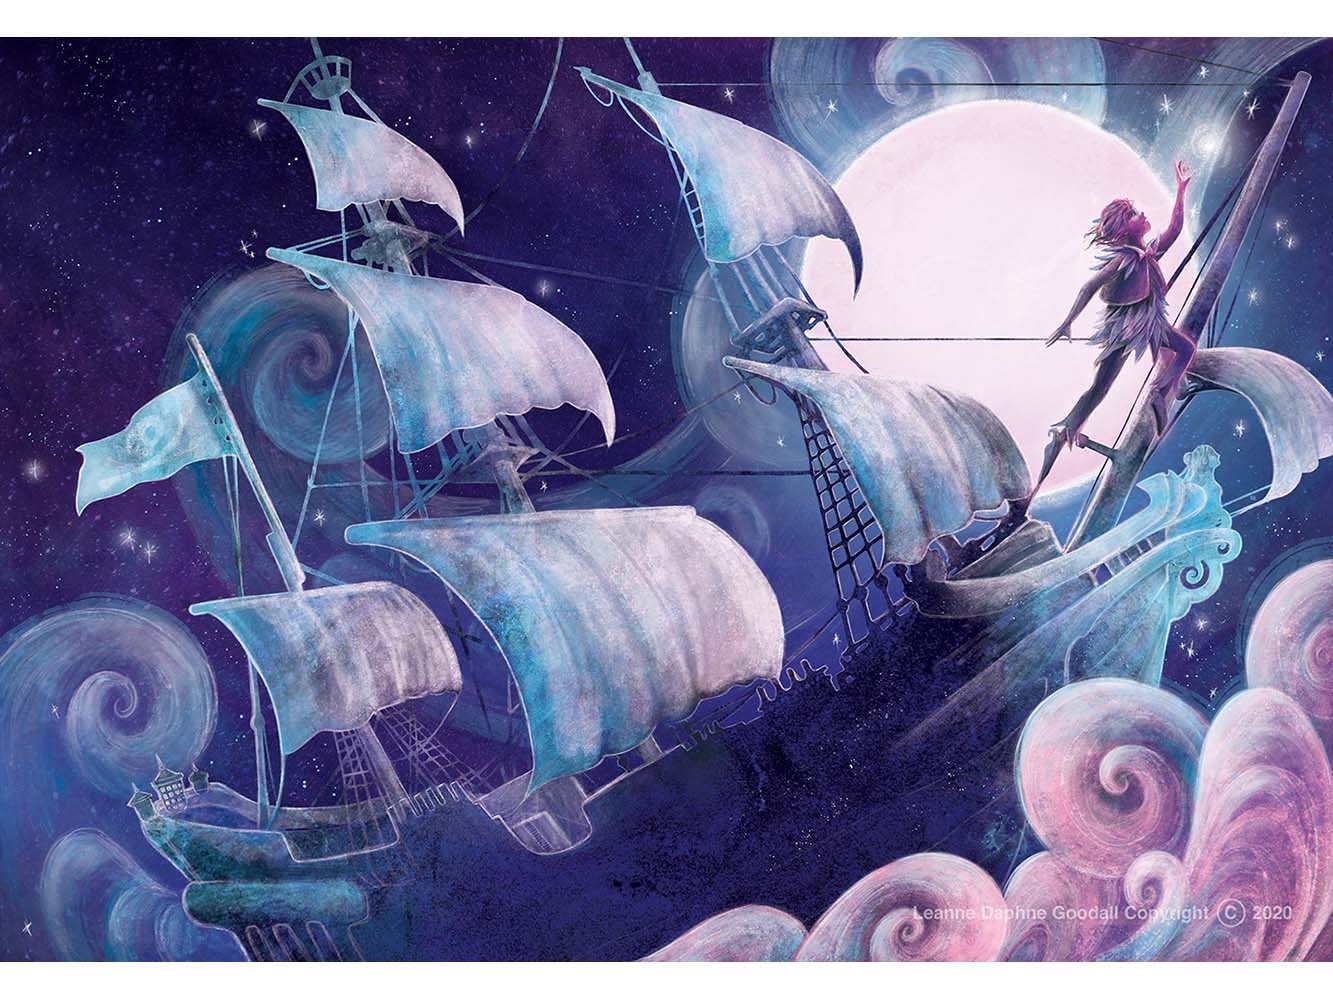 Illustration of pirate ship at night in swirling blue, white and pink water with Peter Pan flying at the front of the ship